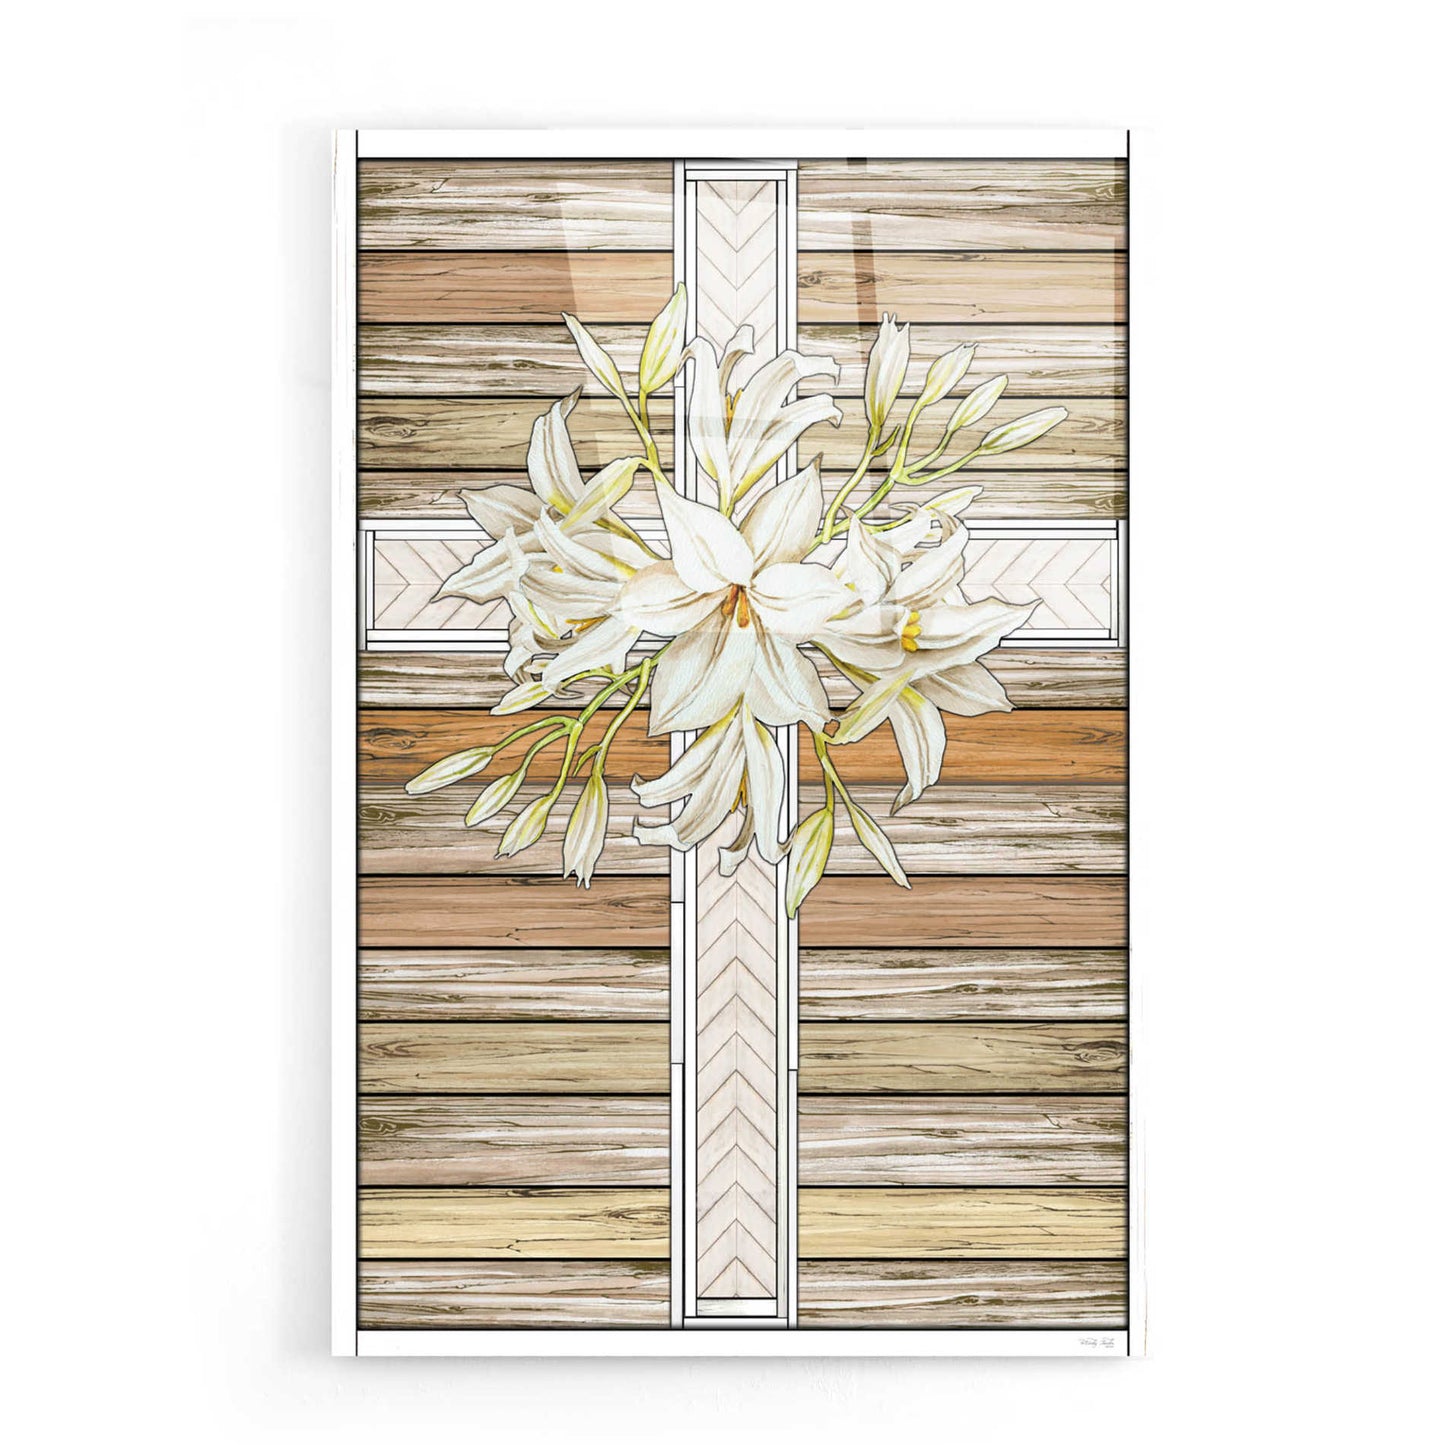 Epic Art 'Floral Cross' by Cindy Jacobs, Acrylic Glass Wall Art,16x24